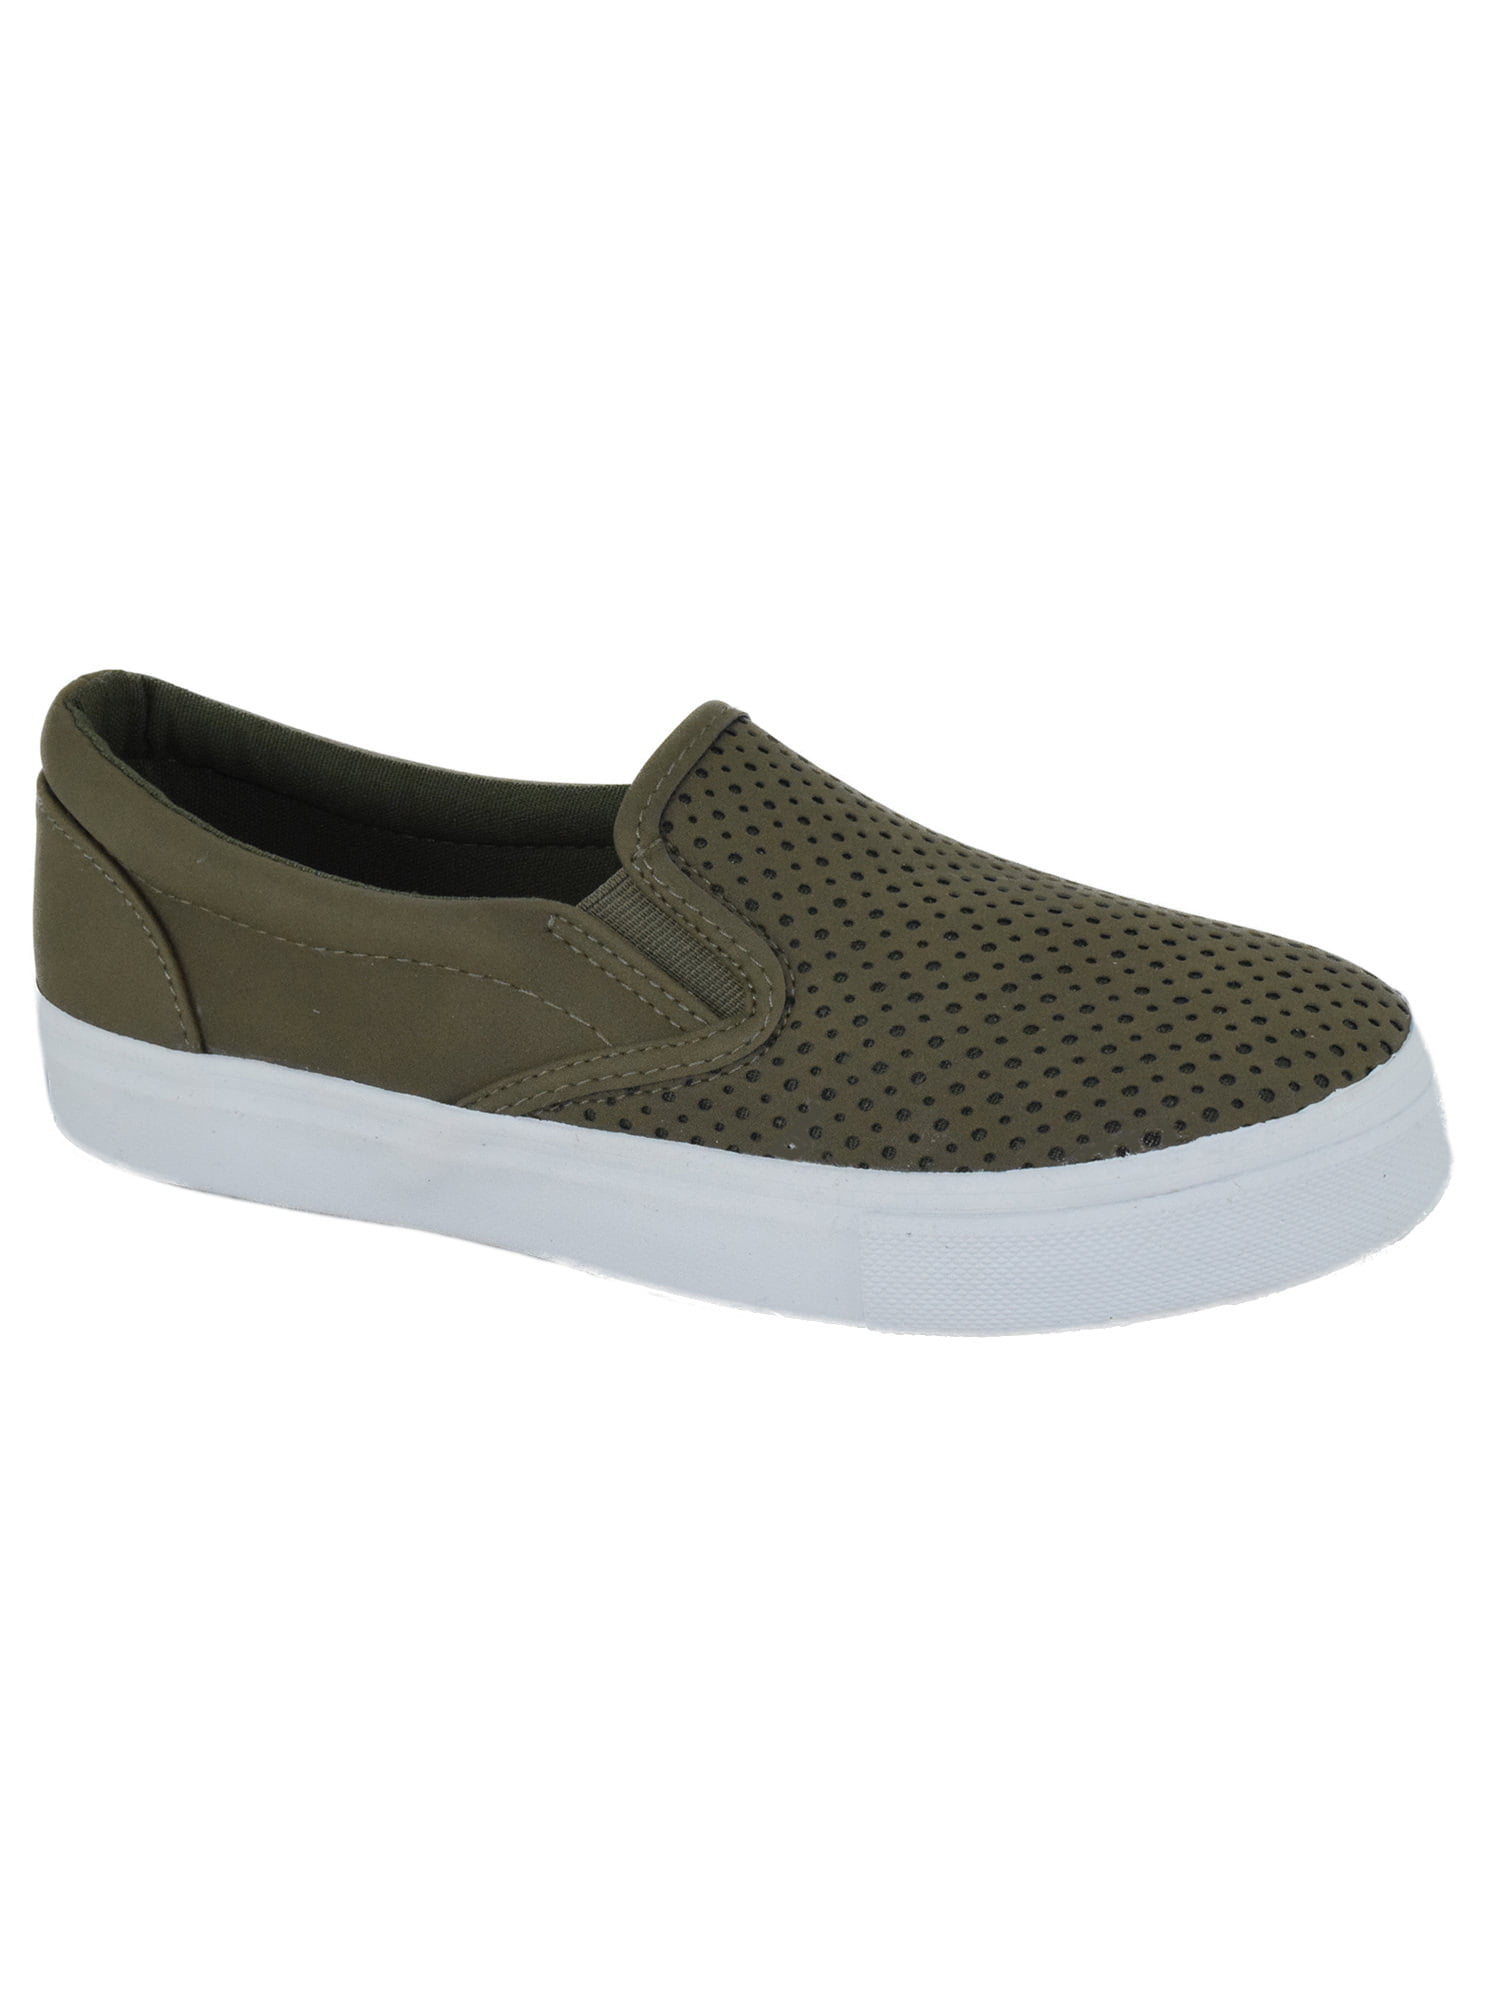 womens green slip on shoes